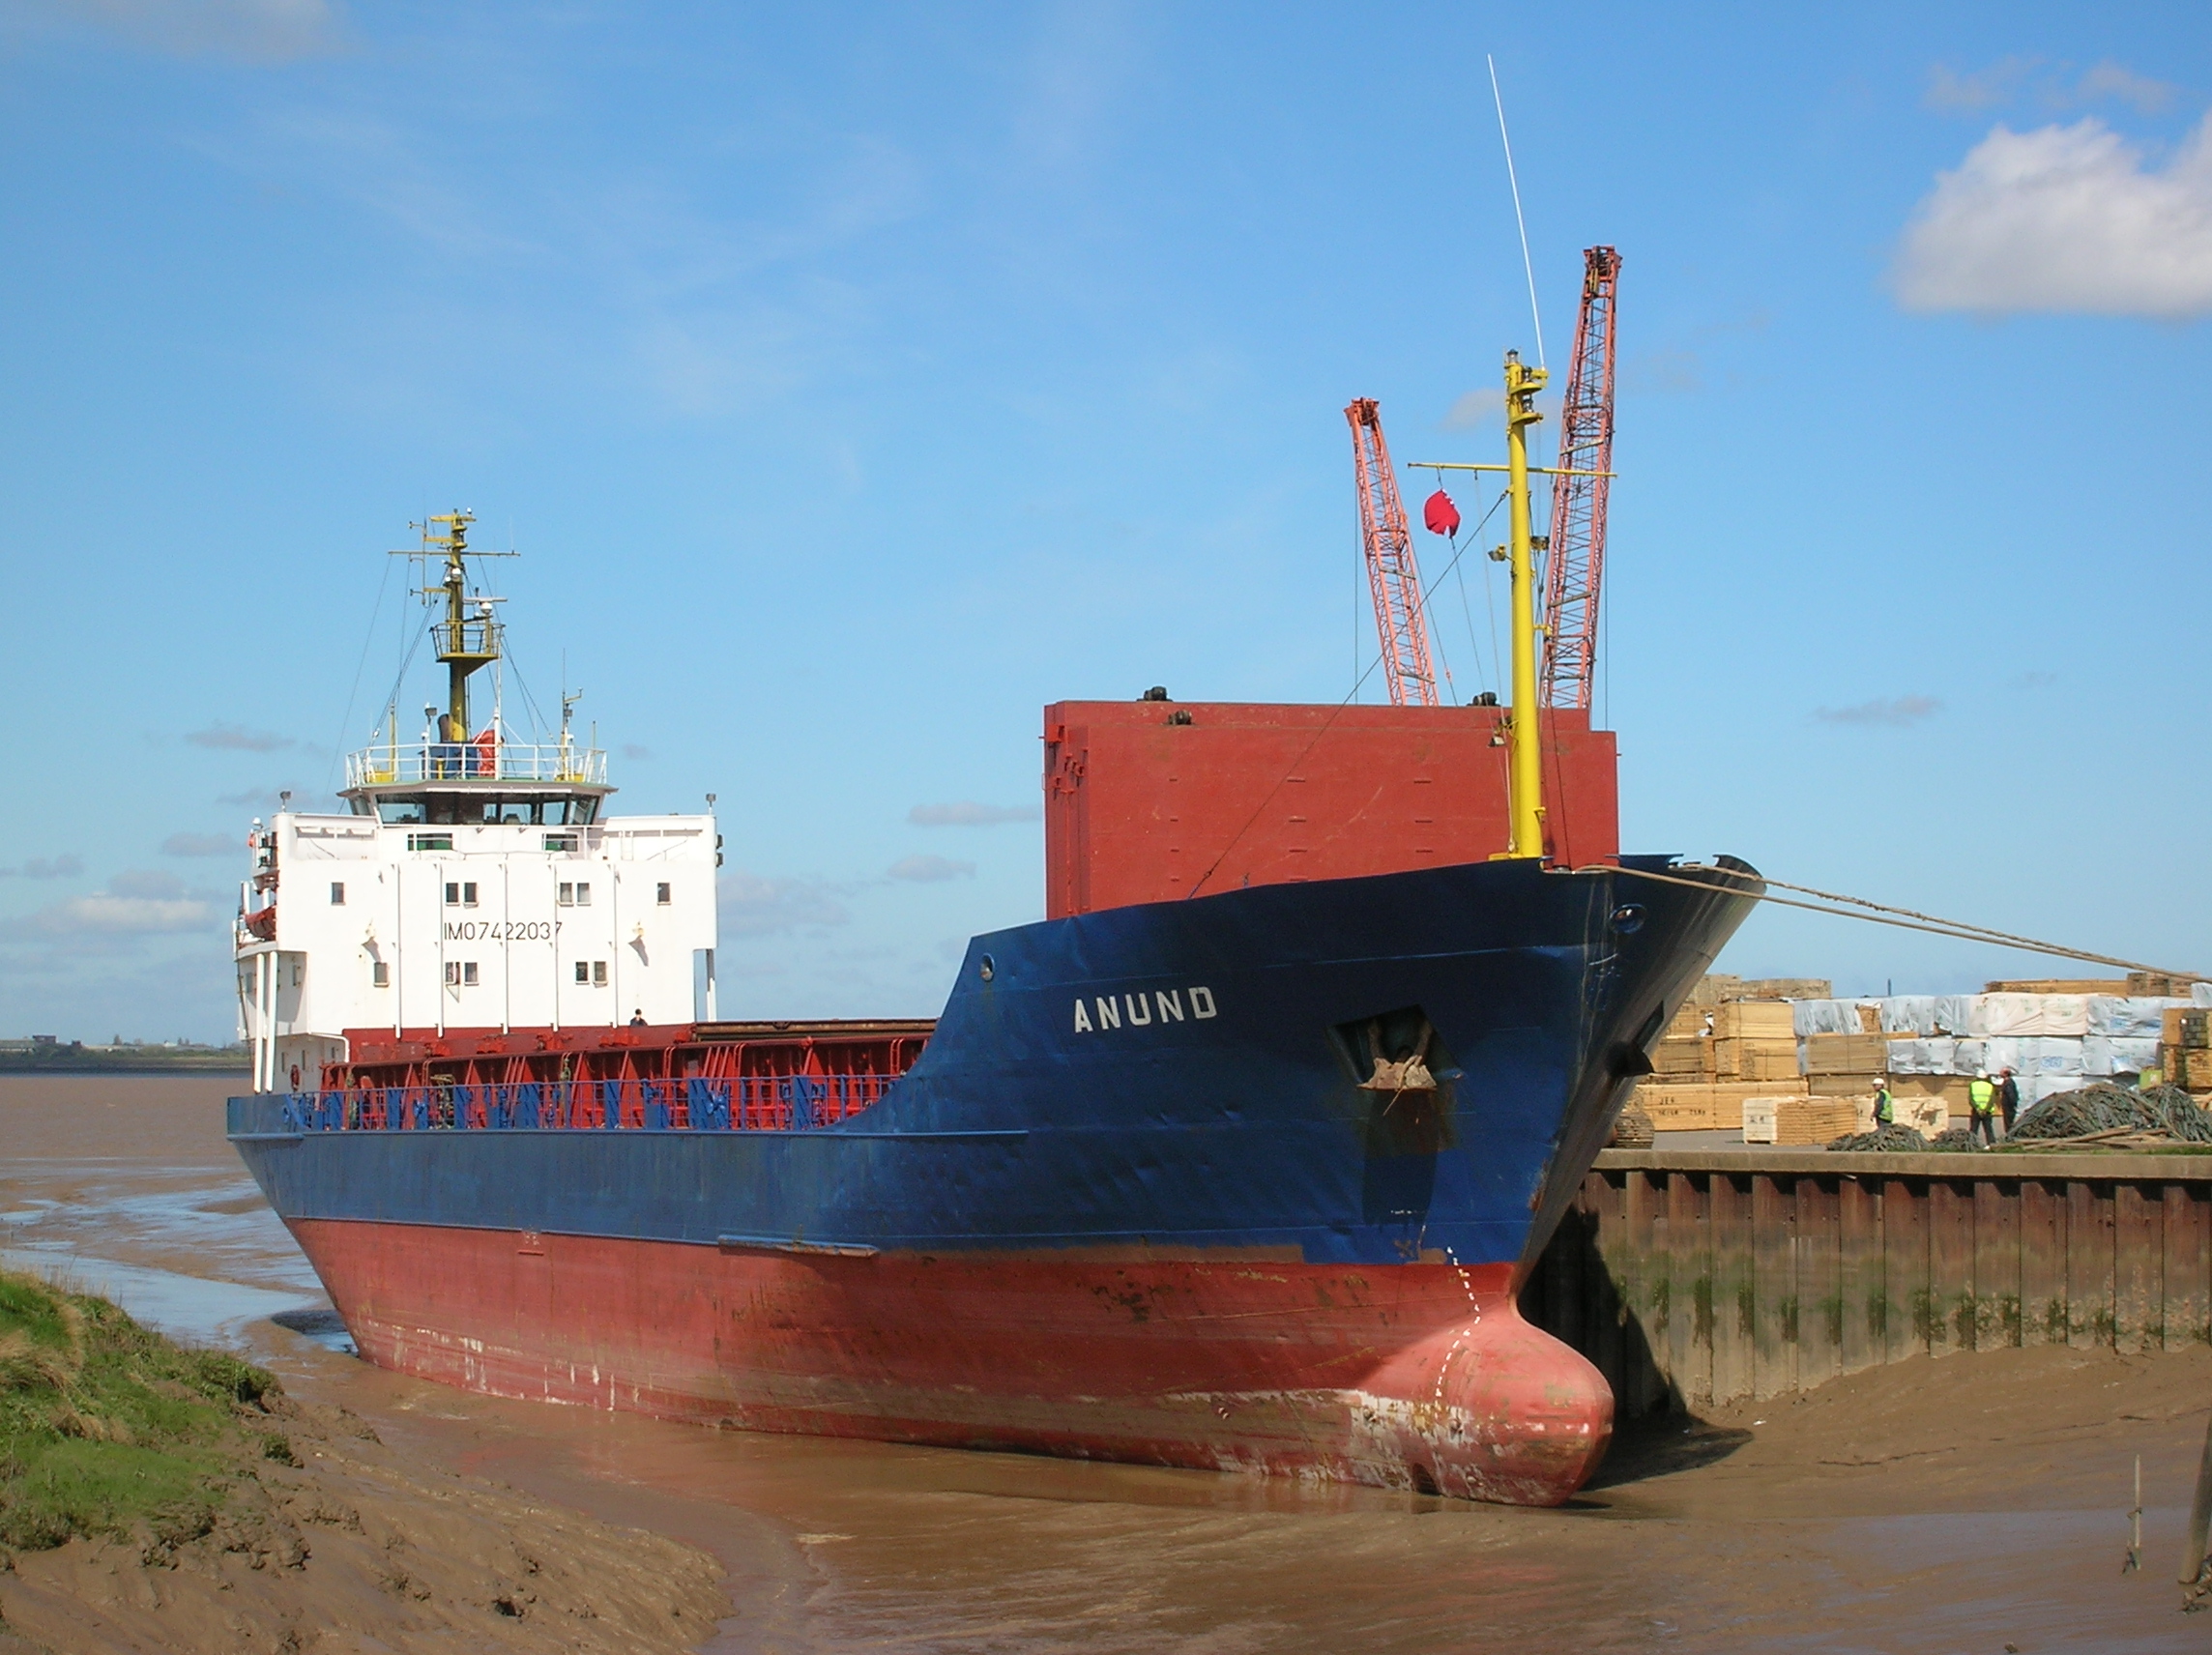 Ship Anund in Barrow Haven (port) - Photo taken at low tide - 28 April 2006